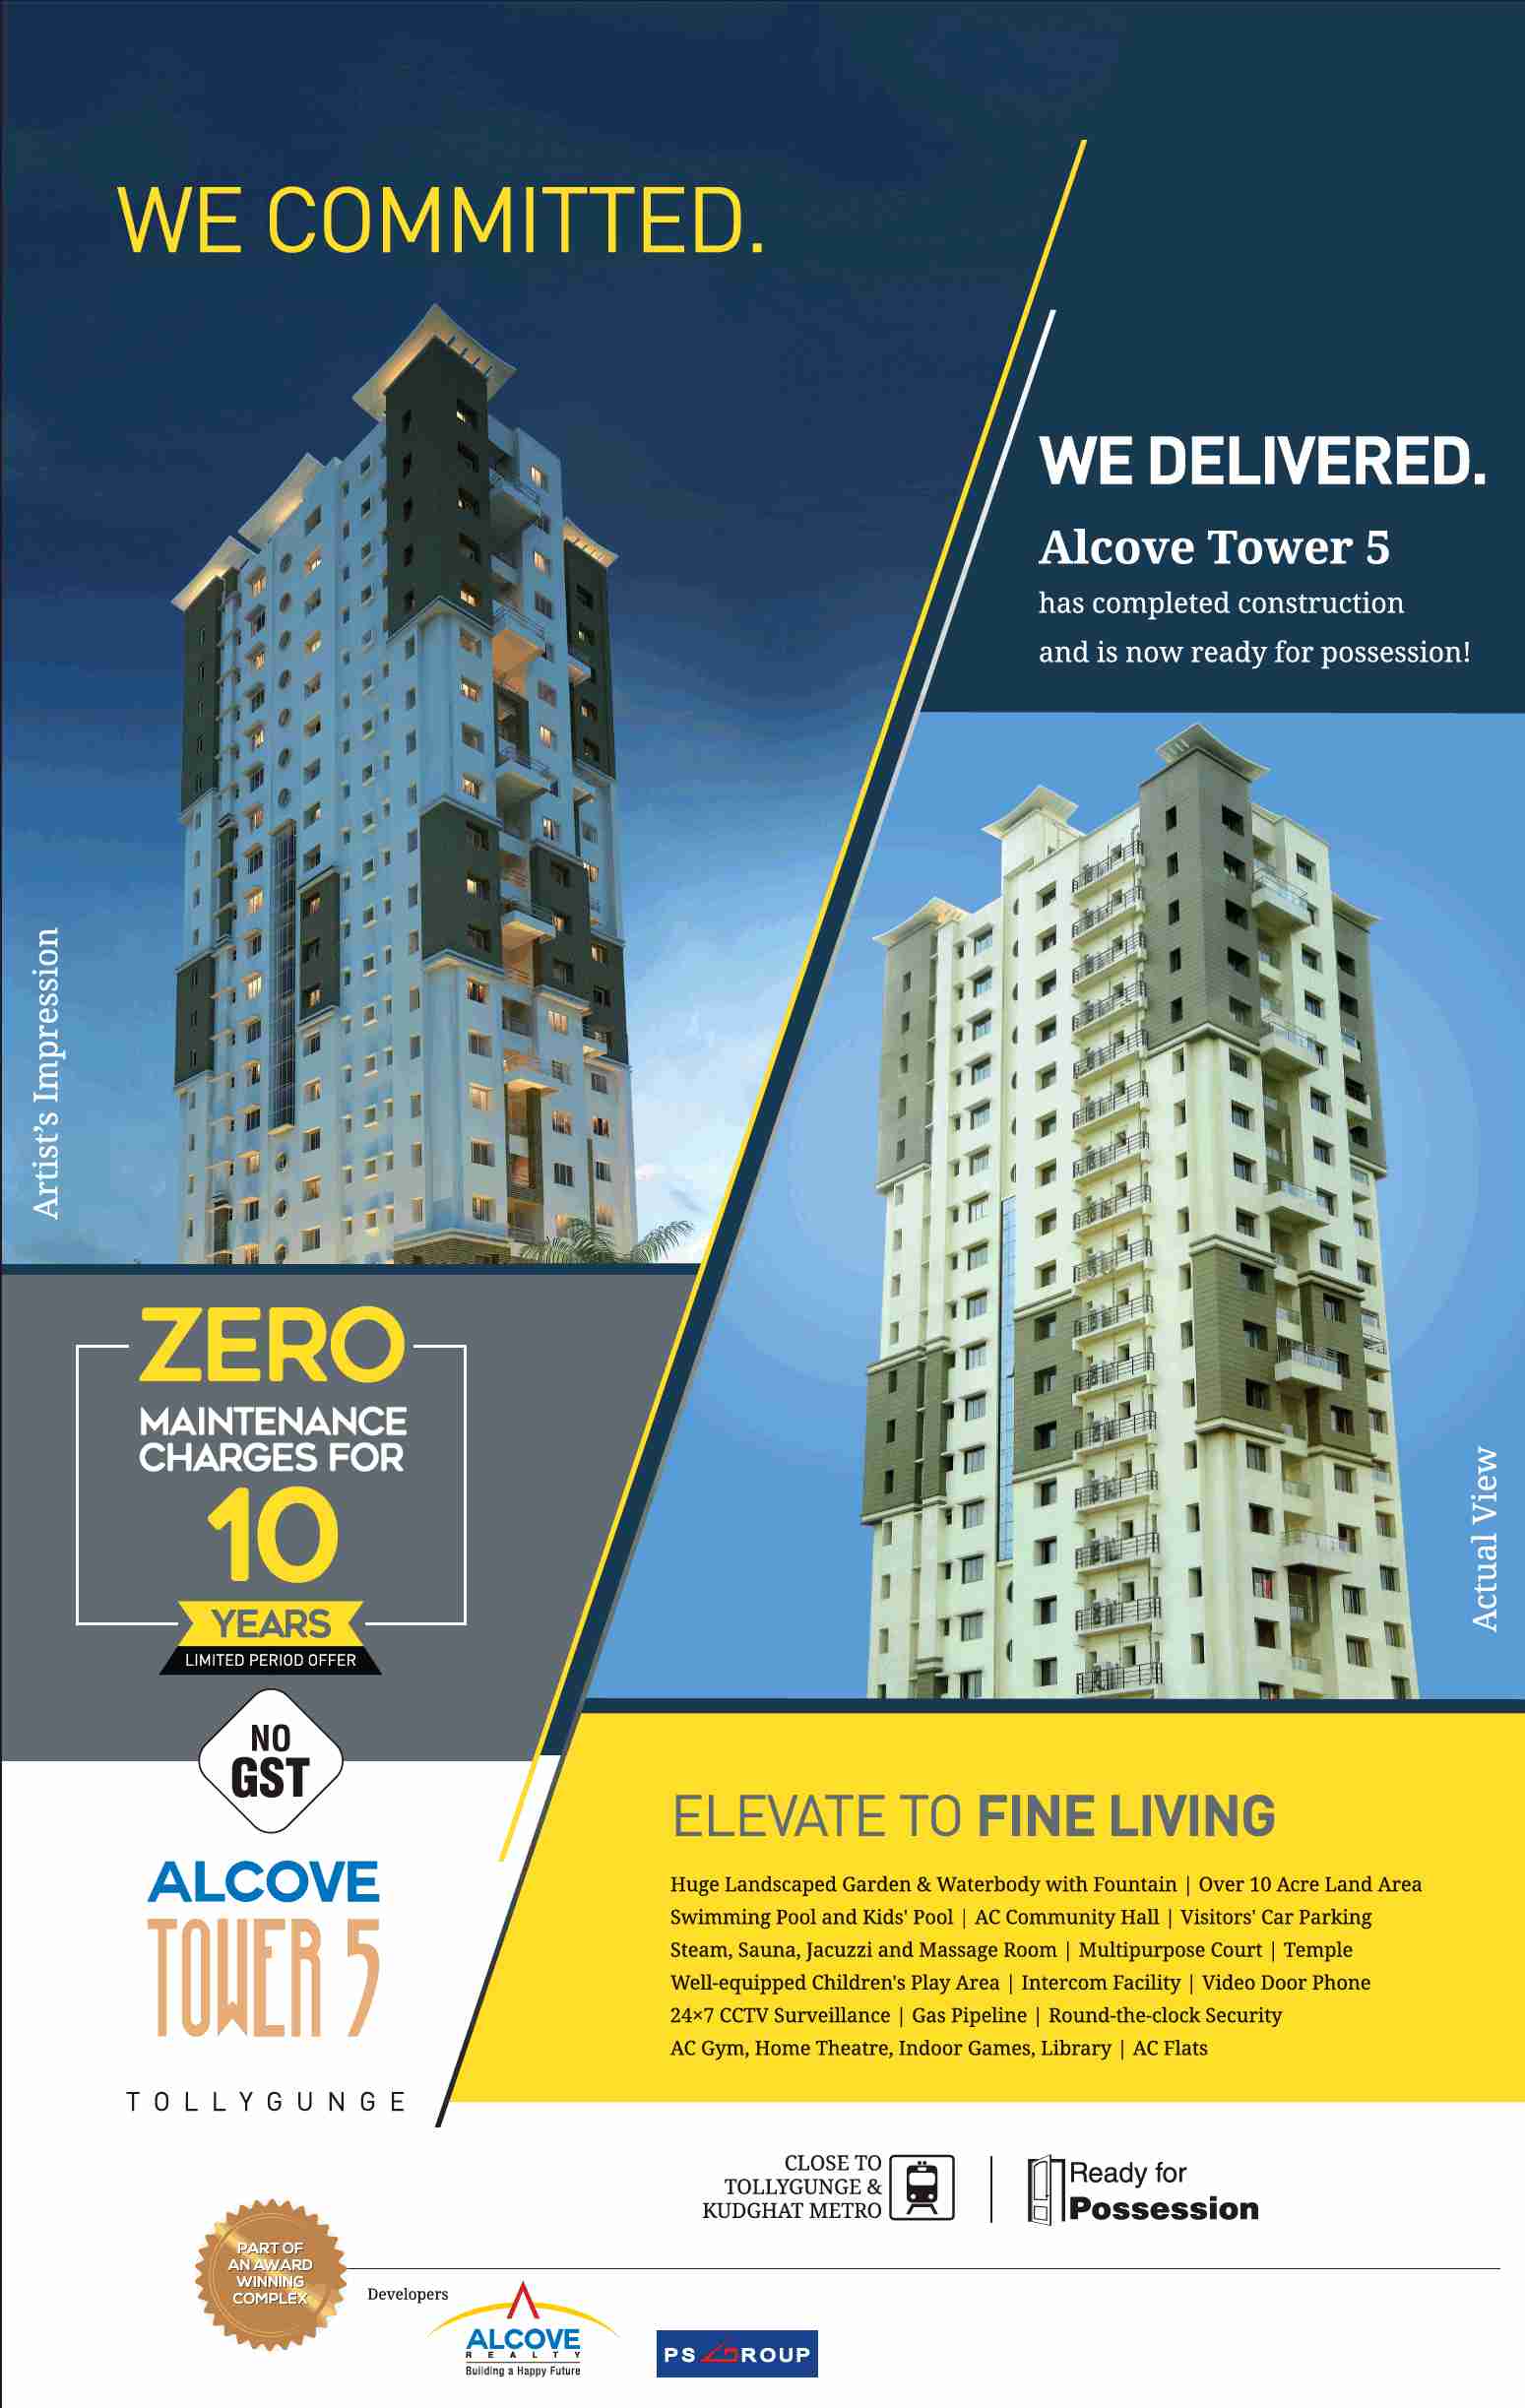 Live with zero maintenance charges for 10 years at PS Alcove Tower 5 in Kolkata